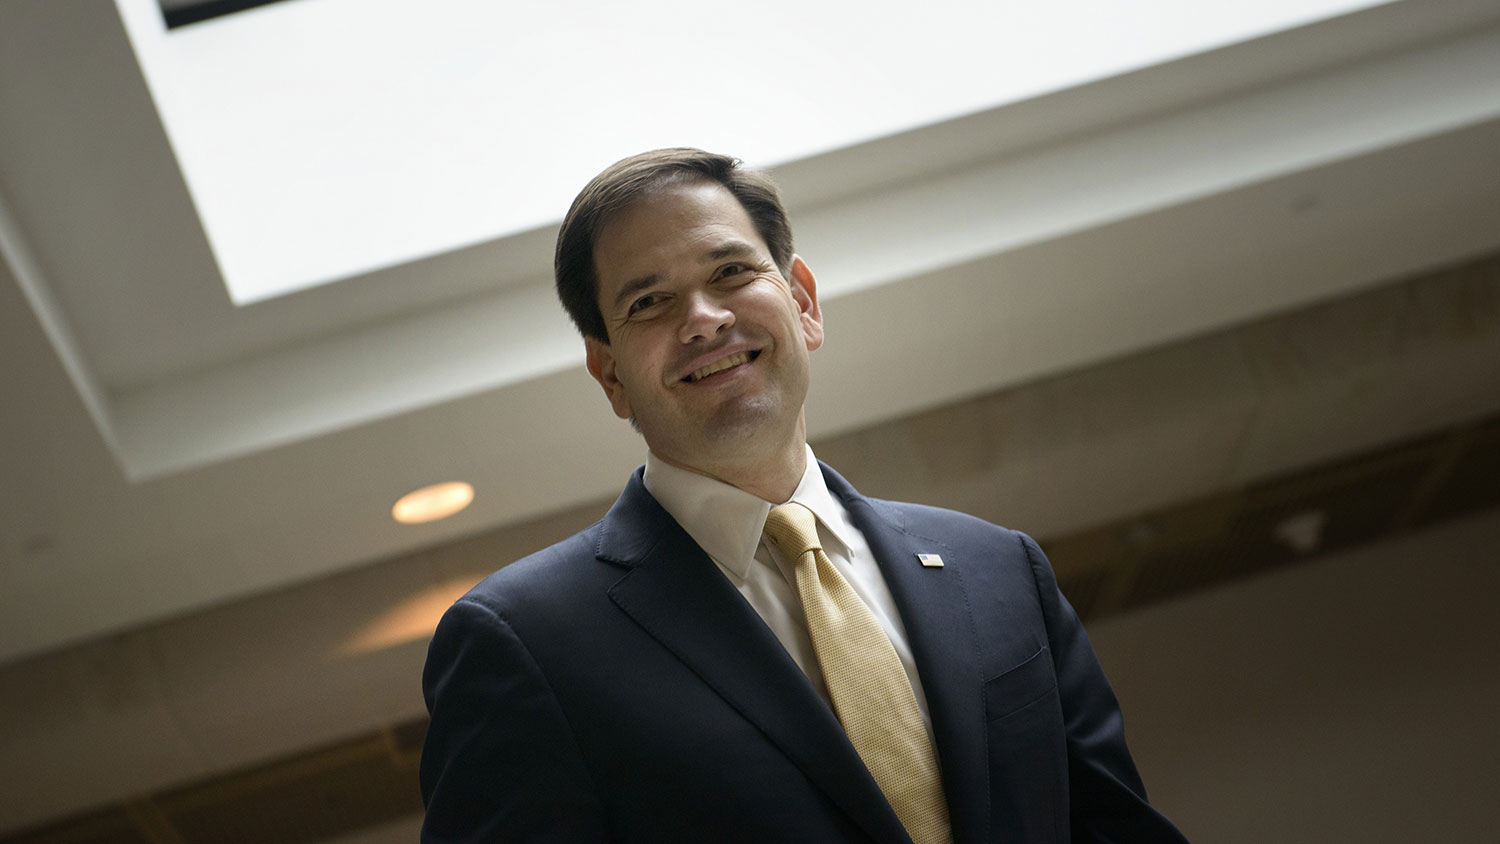 Senator Marco Rubio(R) ,R-FL, leaves after a meeting with US Secretary of State John Kerry and other Senators on Capitol Hill April 14, 2015 in Washington, DC.
